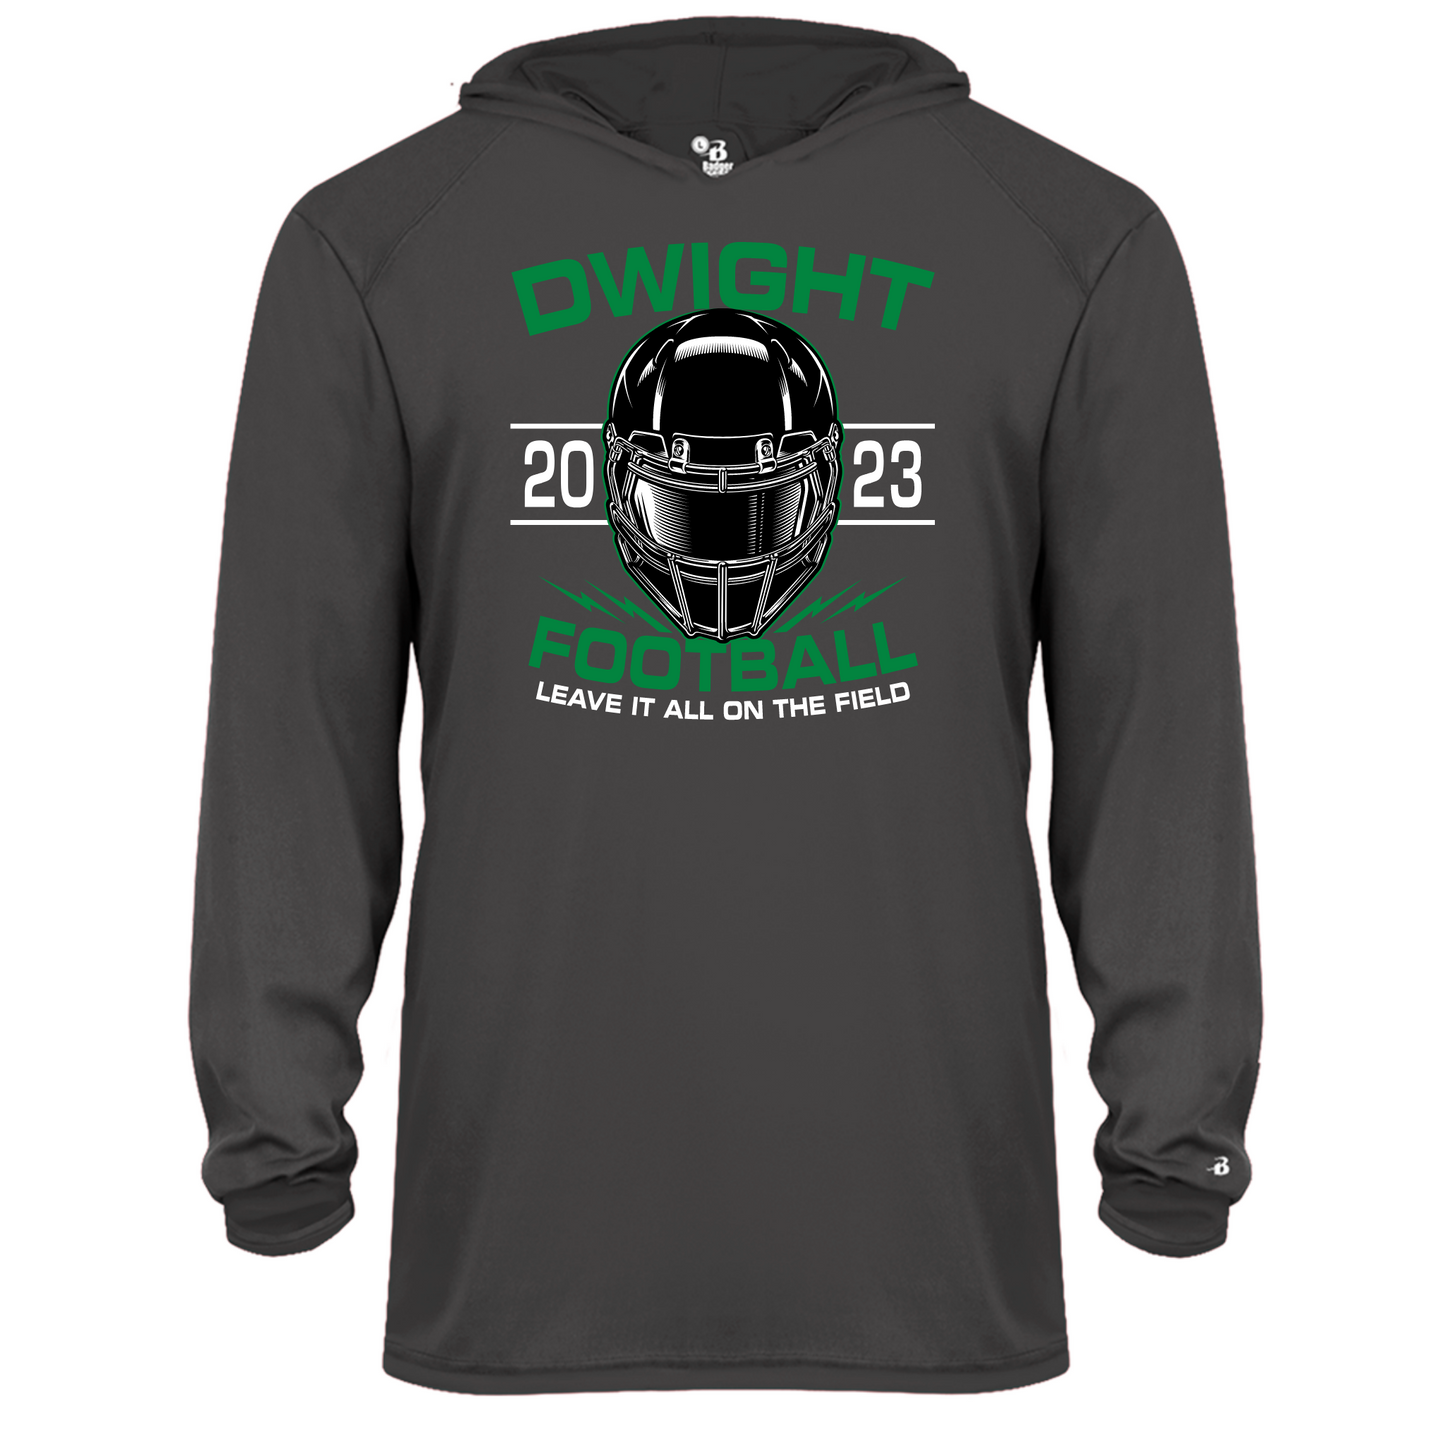 Dwight Football Youth Performance Hooded Tee